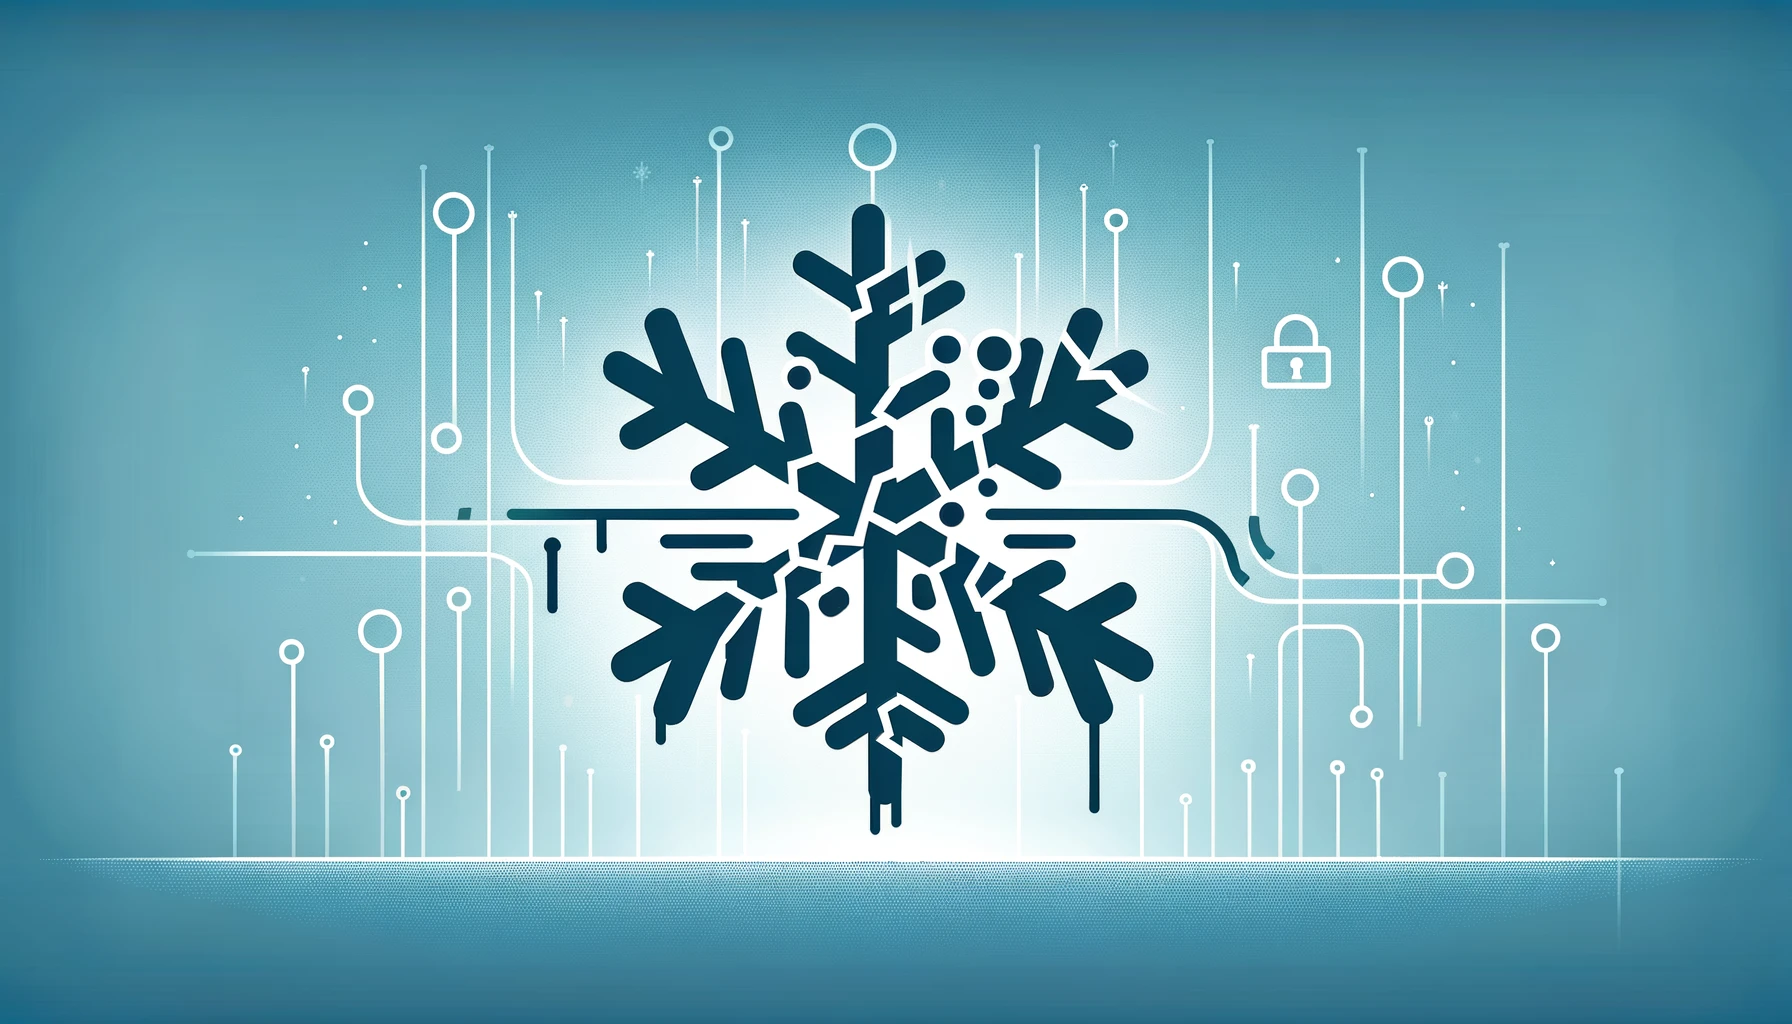 Snowflake’s Silence on Its Customer Data Breaches